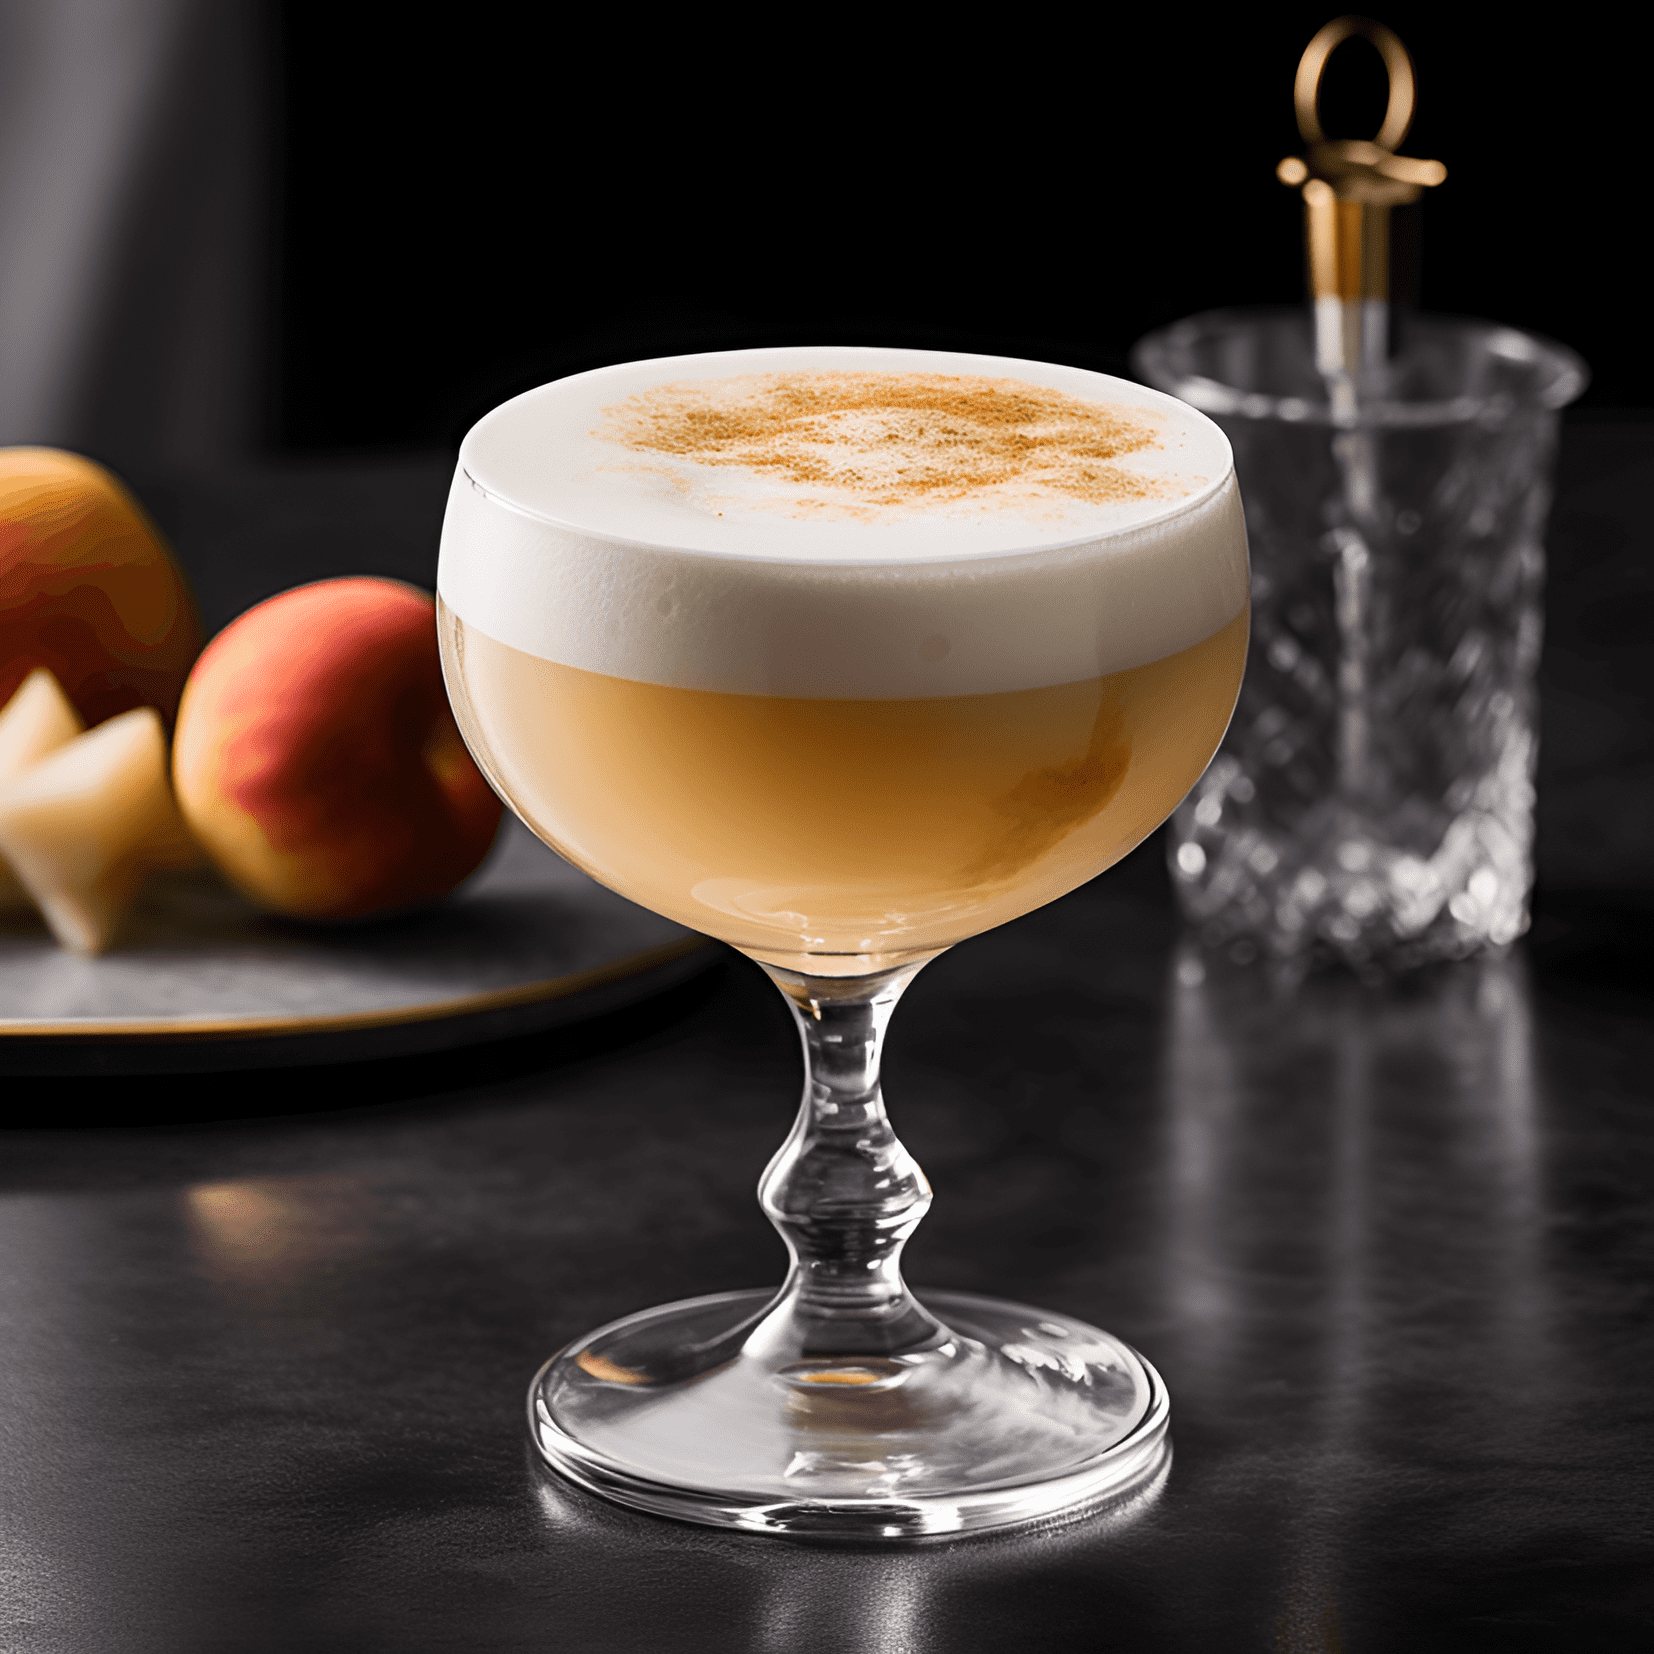 The Apple Brandy Sour is a well-balanced cocktail, with a perfect blend of sweet and sour flavors. The apple brandy provides a rich, fruity taste, while the lemon juice adds a refreshing tang. The simple syrup adds just the right amount of sweetness, making this cocktail a delightful and satisfying drink.